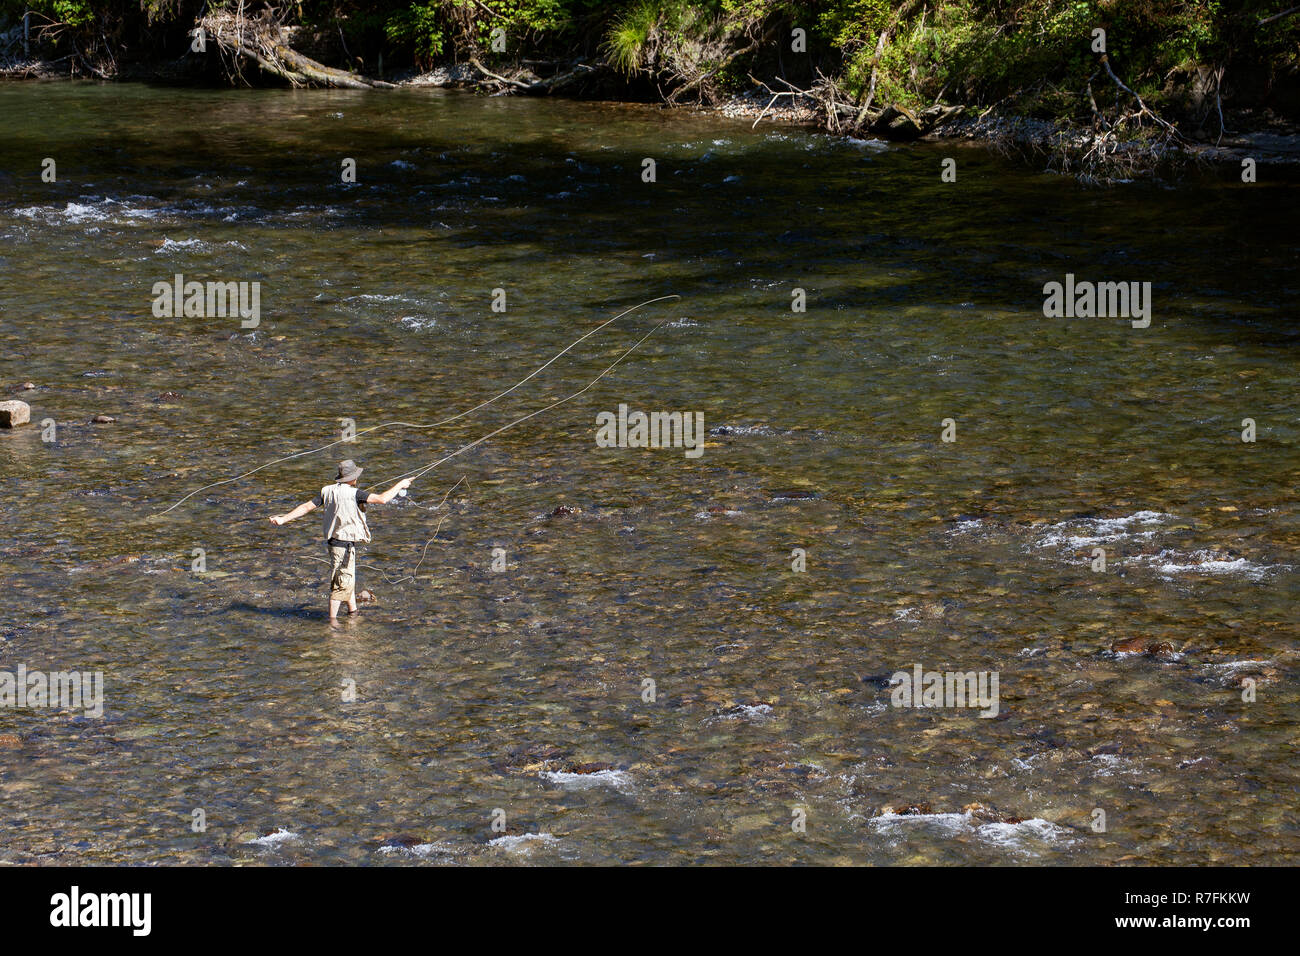 WA09143-00...WASHINGTON - Fly fishing on the Middle Fork of the Snoqualme River near North Bend. (MR# J9) Stock Photo